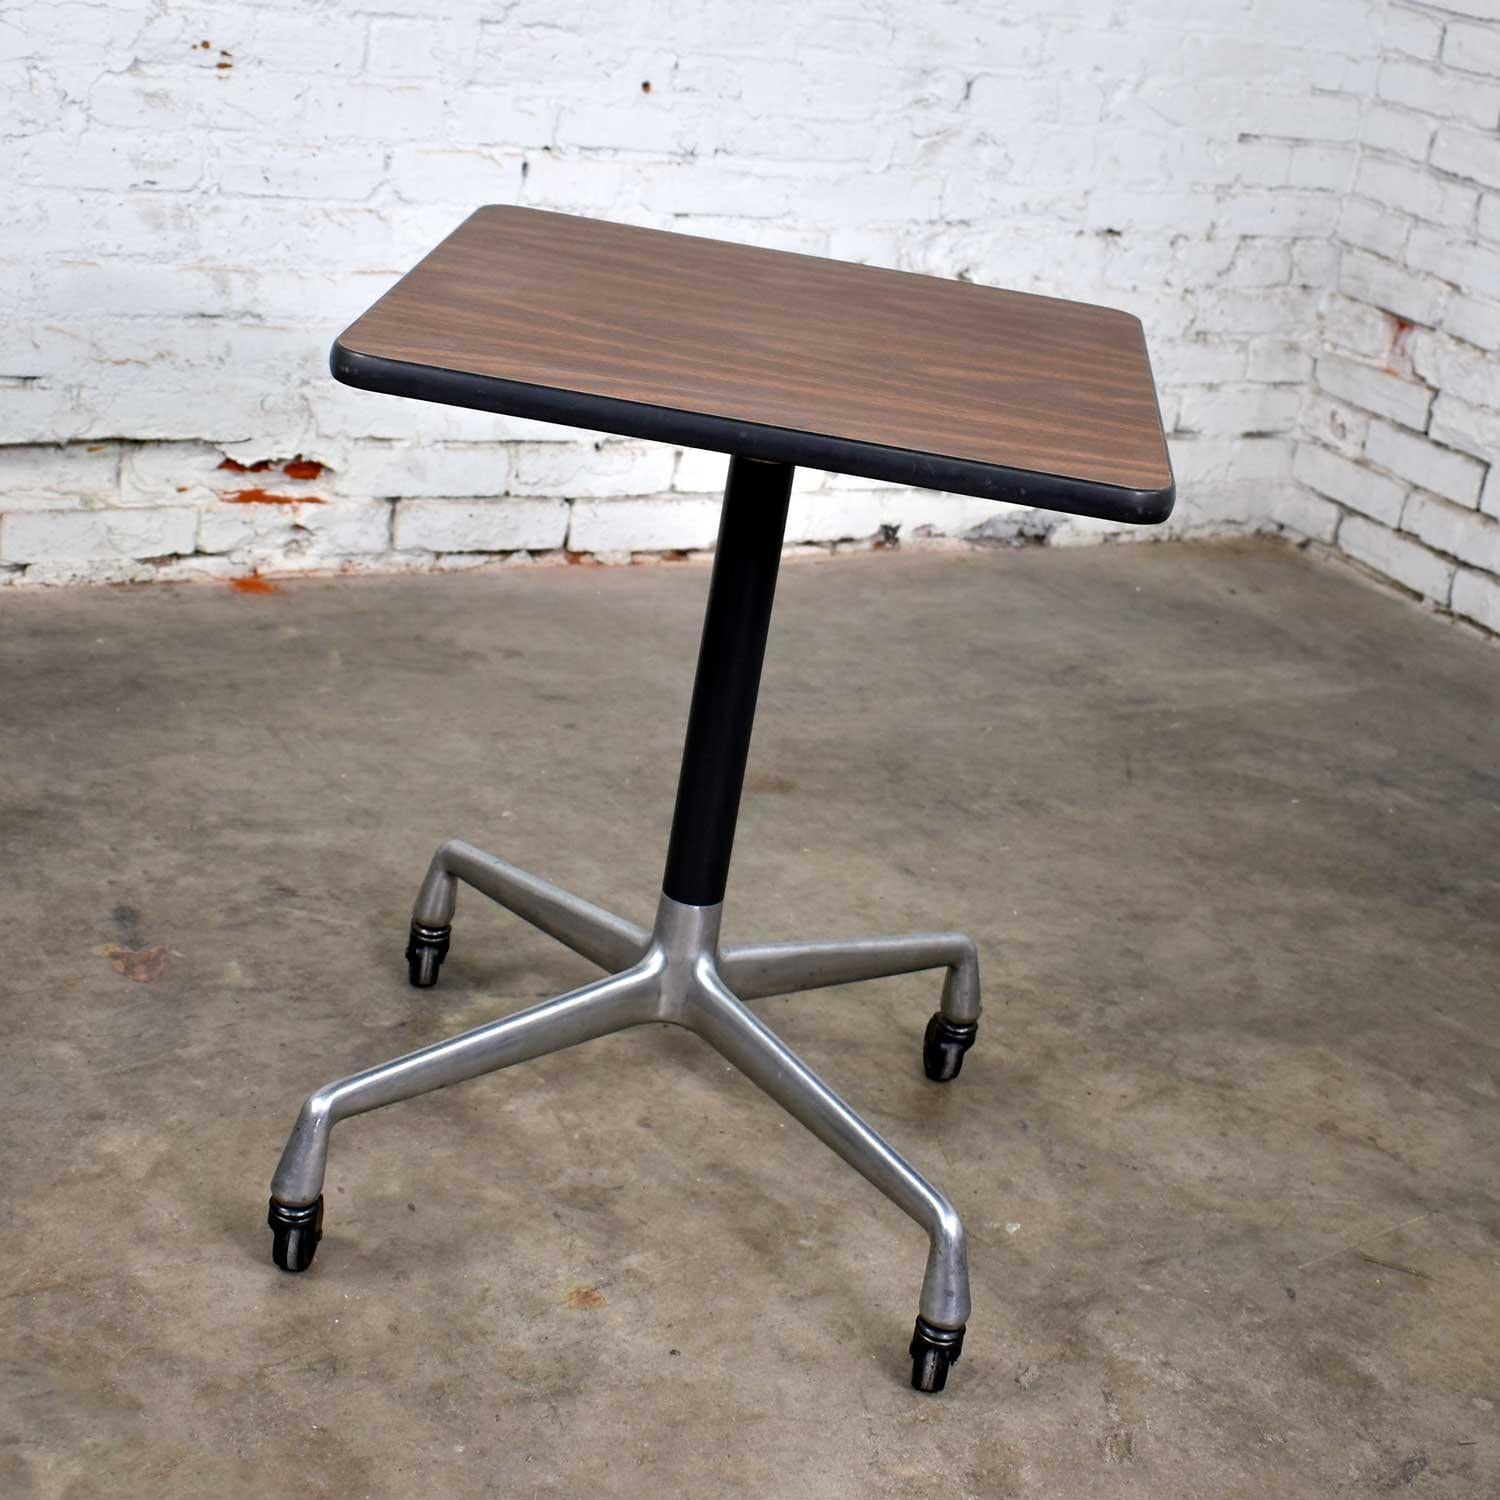 Handsome square rolling side table designed by Charles and Ray Eames for Herman Miller. Comprised of a faux wood grain laminate top and universal base. In wonderful vintage condition with the normal signs of age. There is some darkening to the